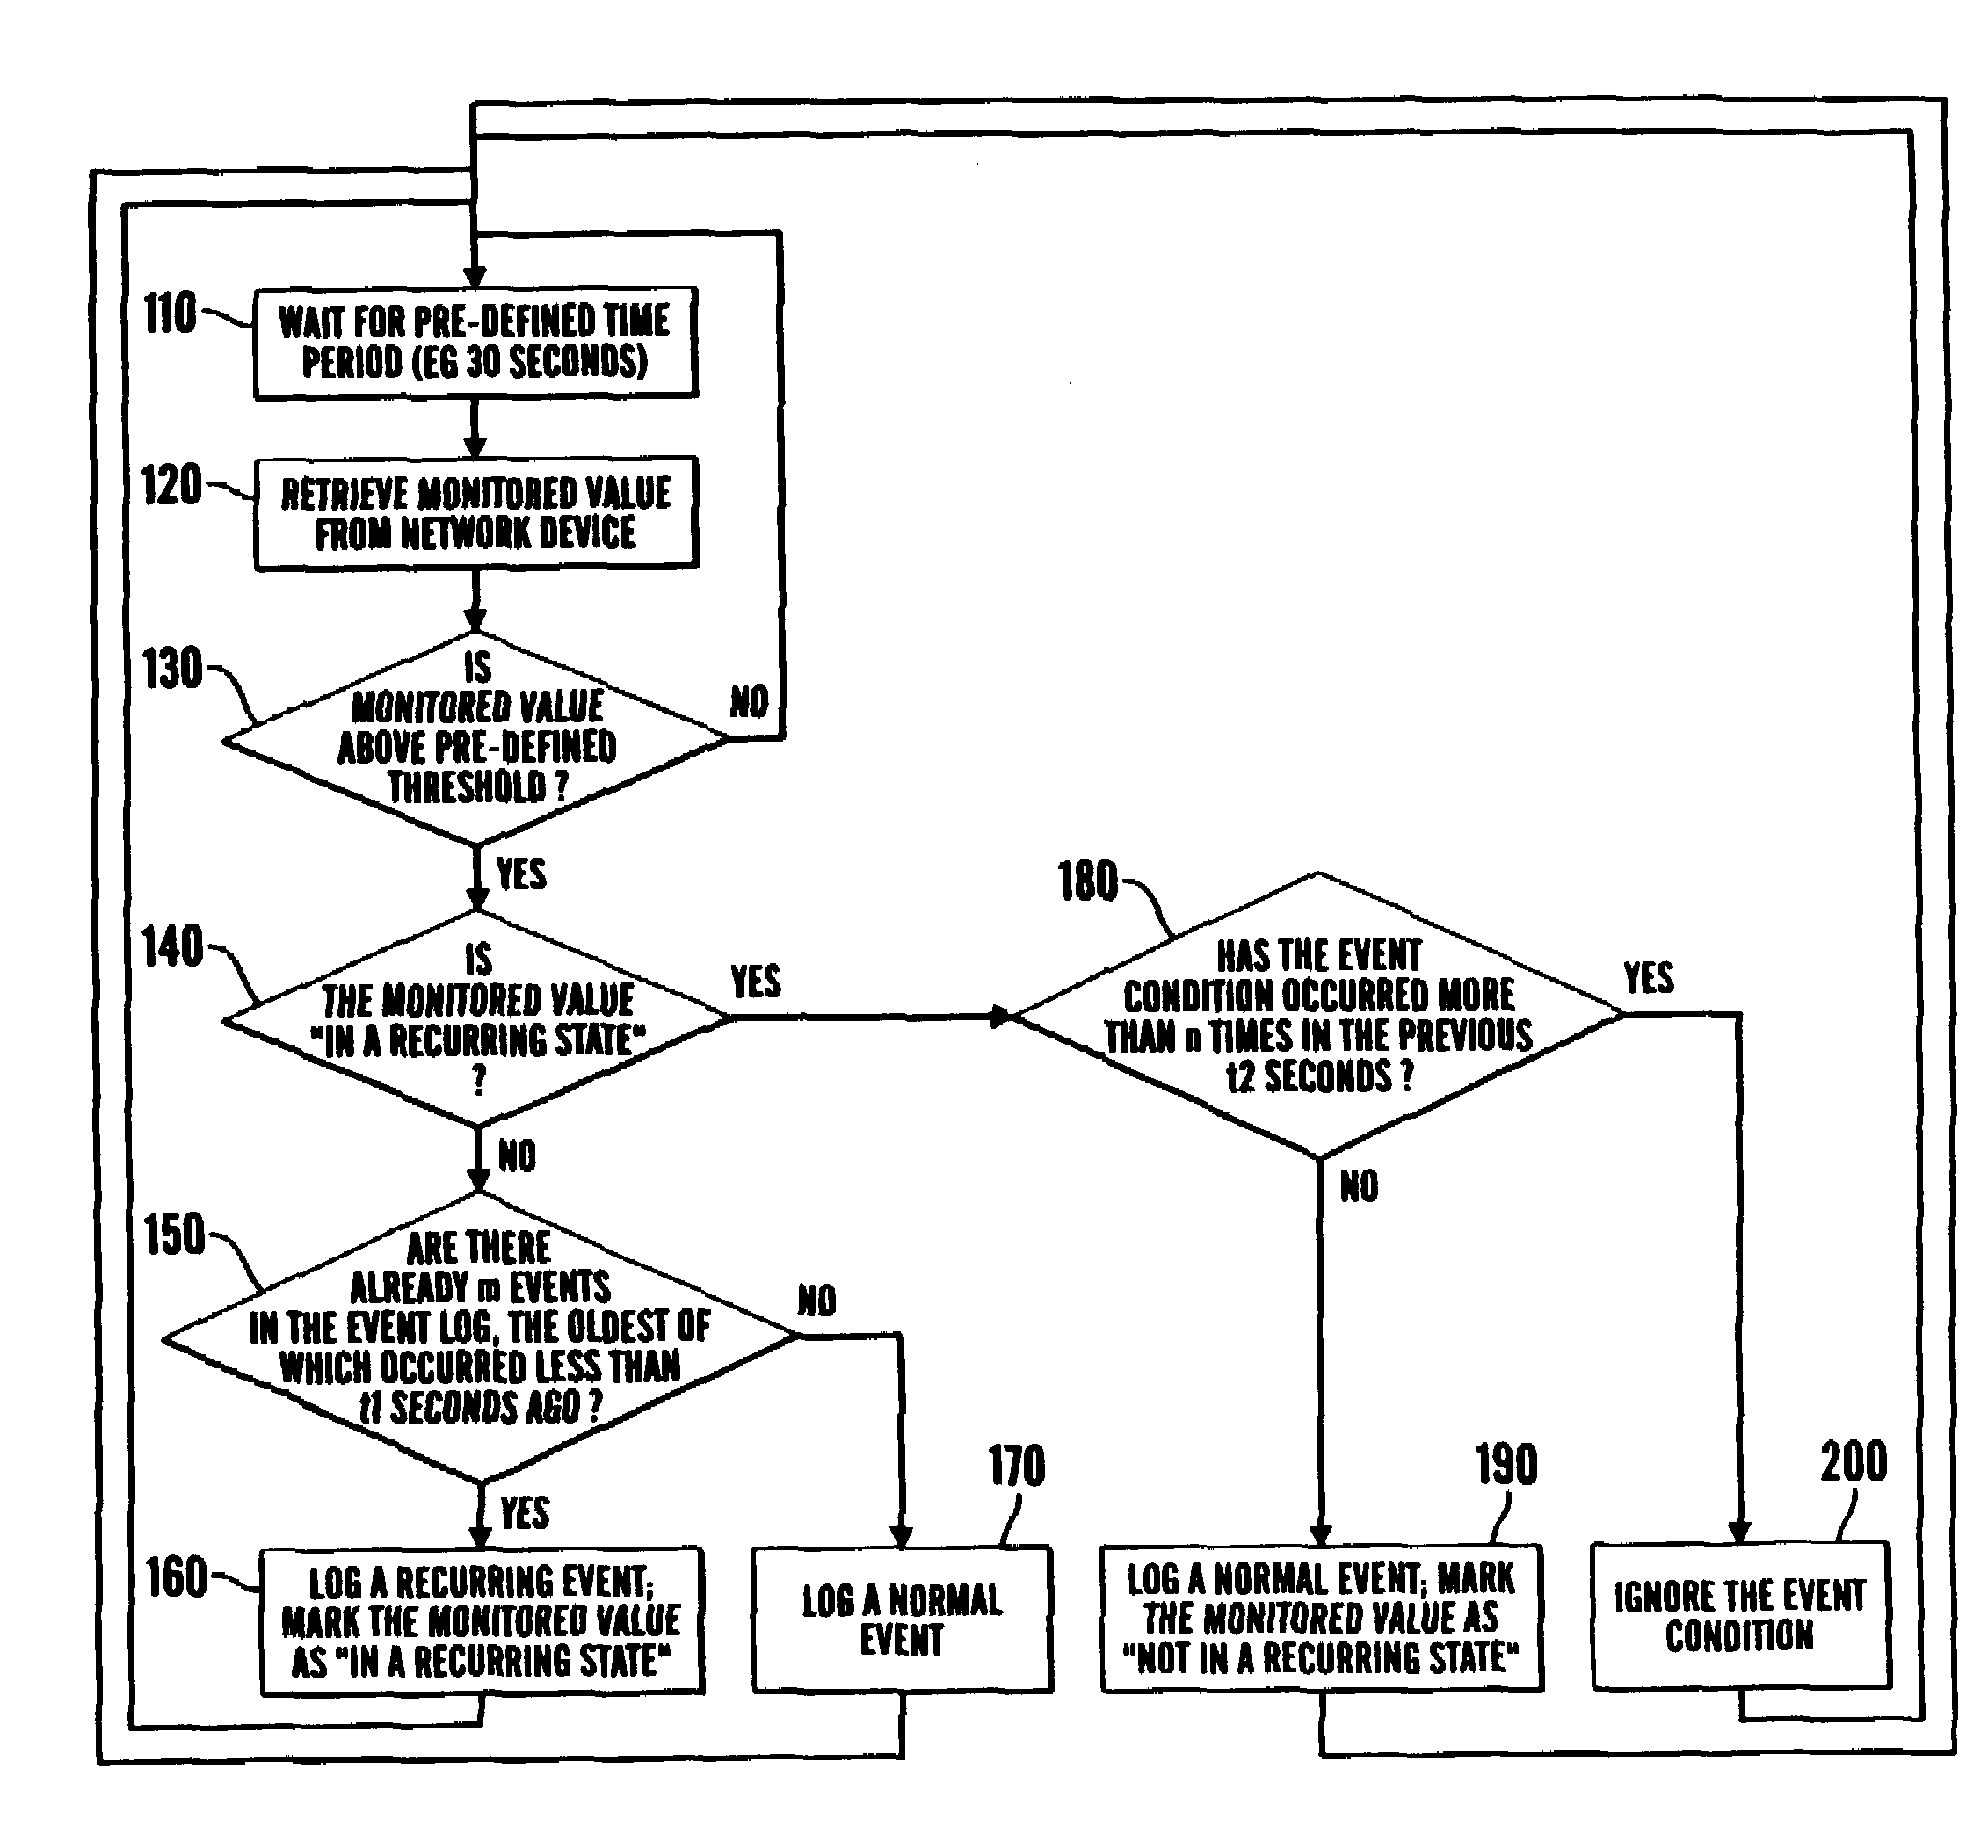 Apparatus and method for processing data relating to events on a network